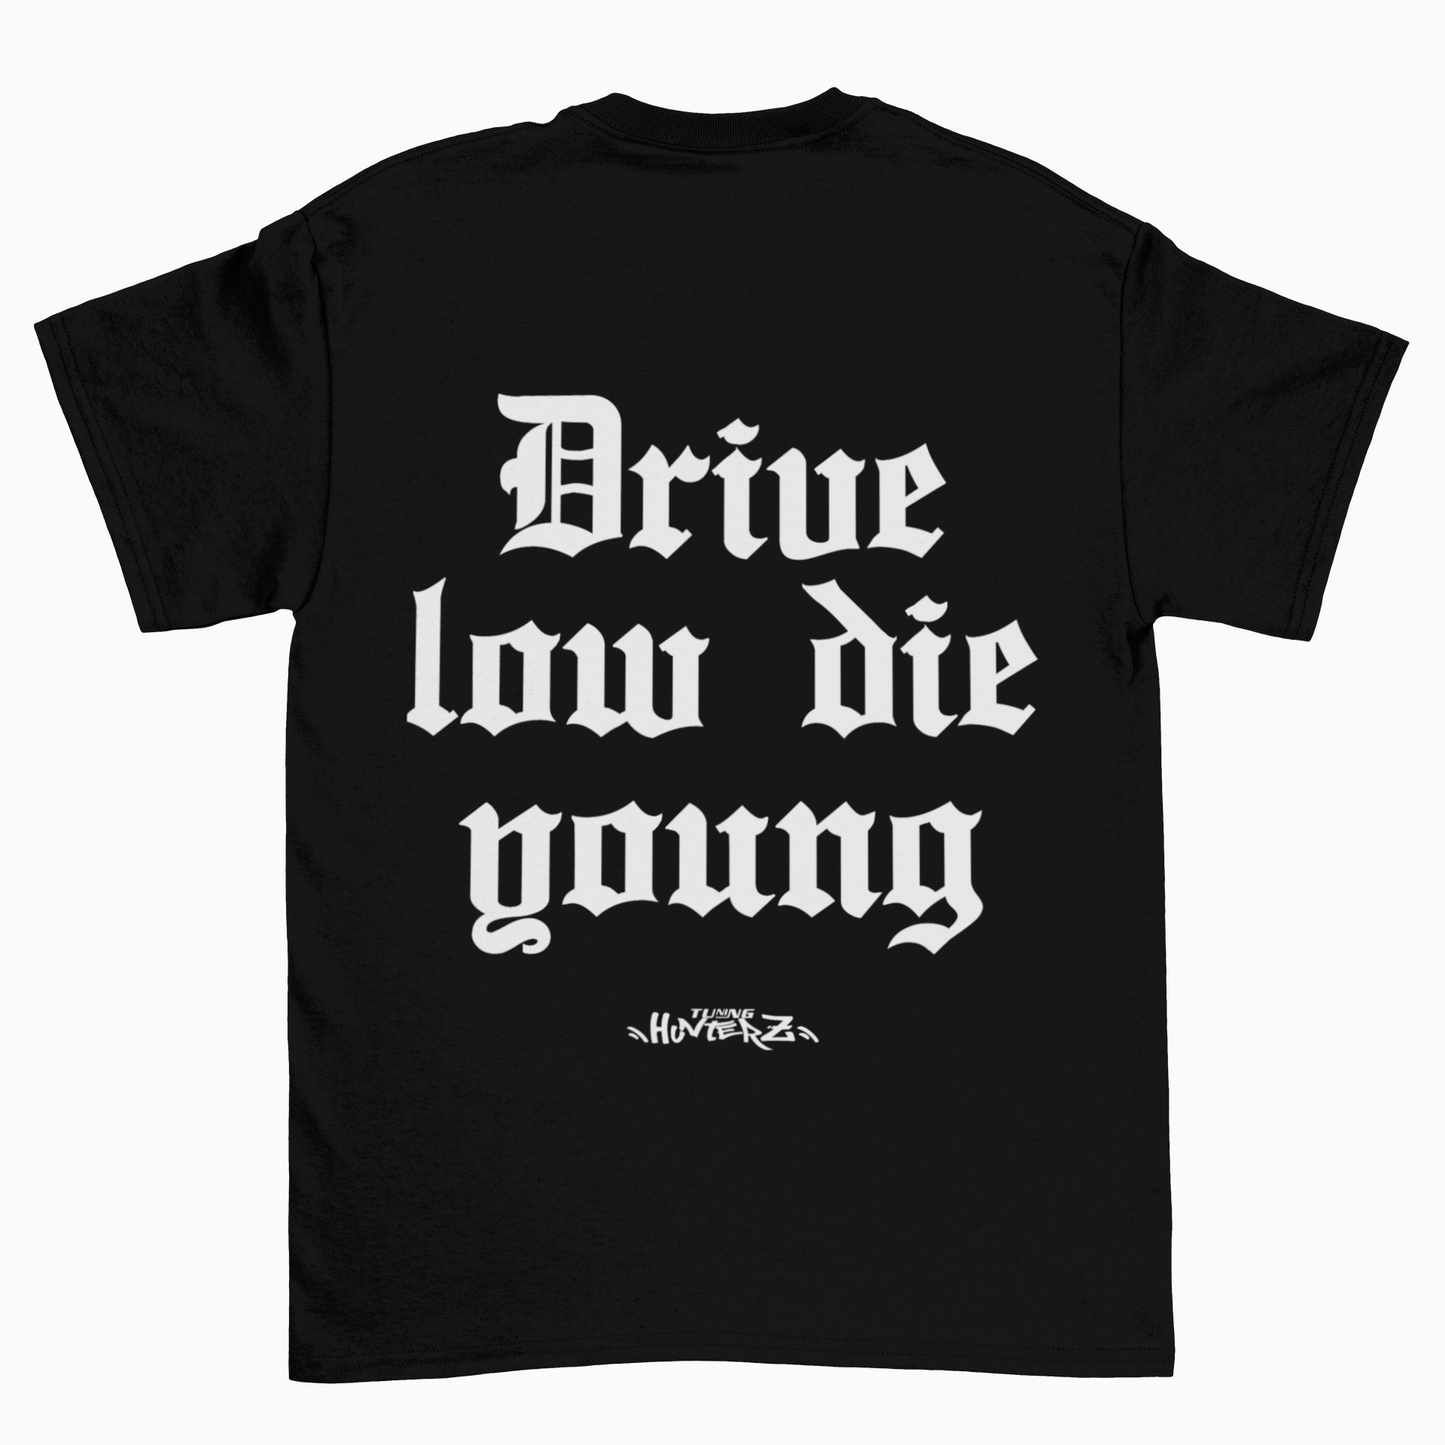 Drive Low Die Young - Unisex Shirt